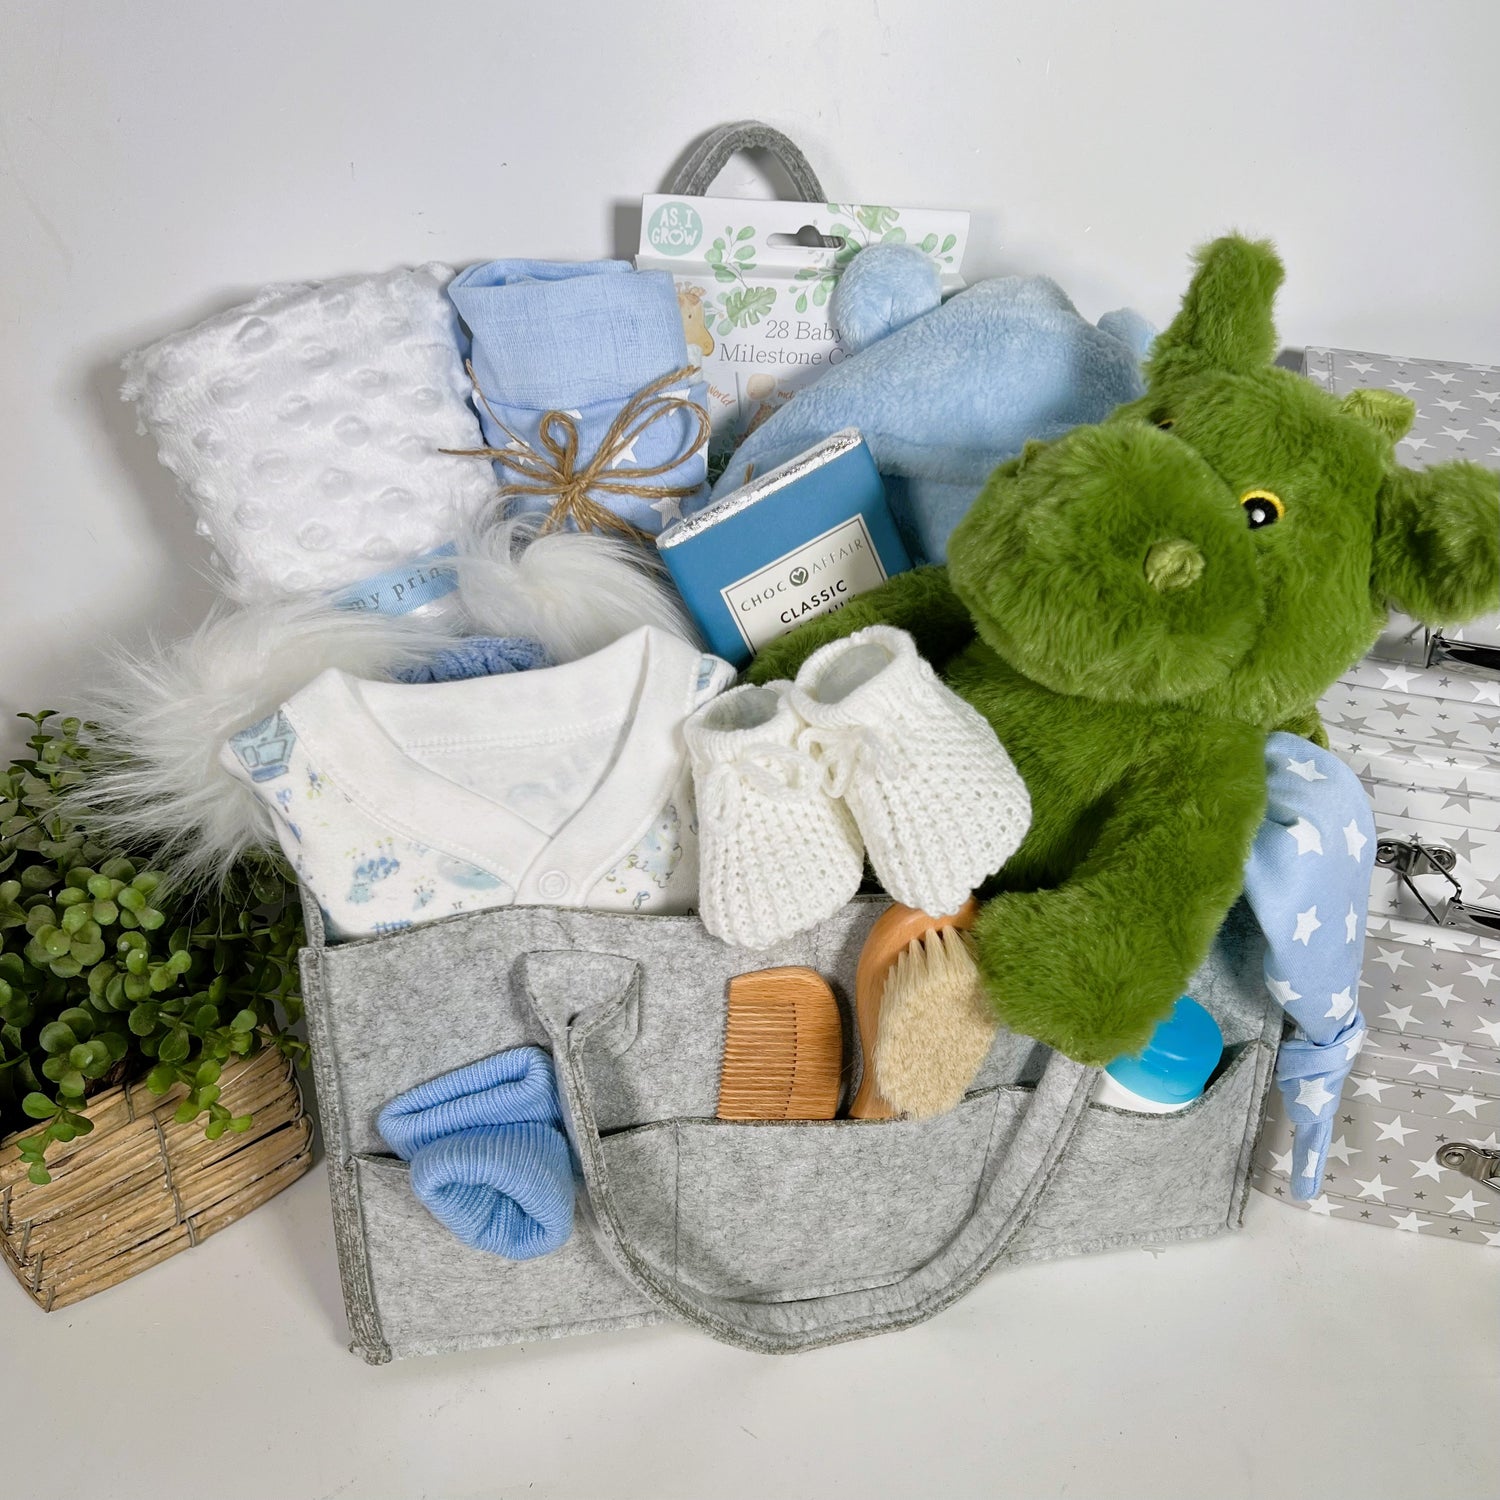 A grey nappy caddy containing a green dragon soft baby toy, a blue and white baby sleepsuit, a blue and white baby pompom hat, a soft white baby blankets, a blue baby dressing gown, a Ziggle baby knot hat and Ziggle baby bib in blue and white stars.